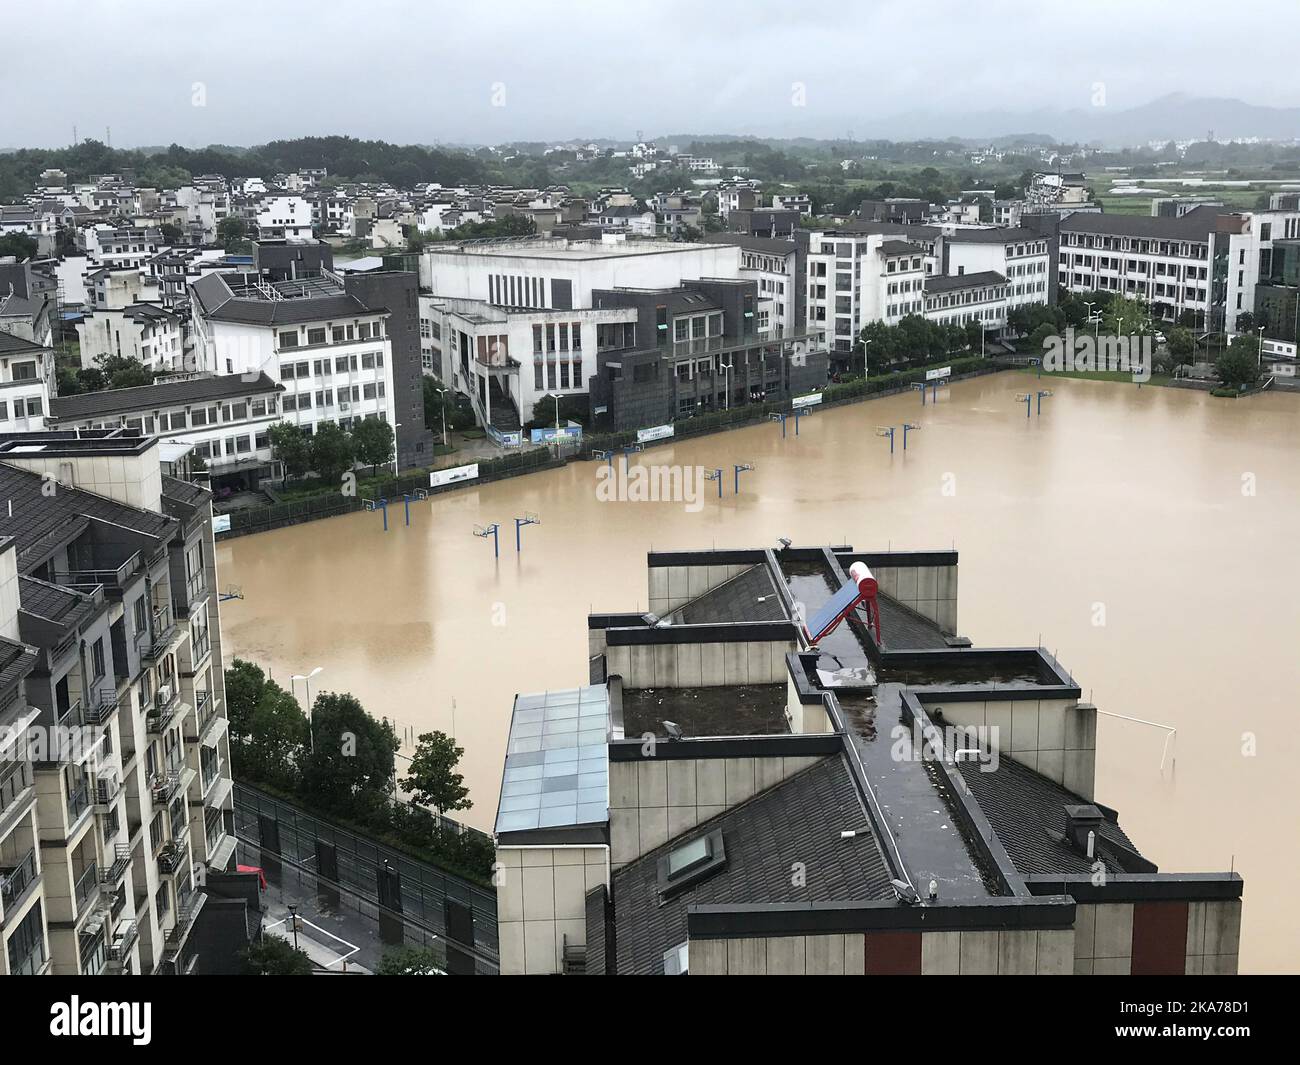 (200707) -- SHEXIAN, July 7, 2020 (Xinhua) -- Photo taken on July 7, 2020 shows a view of Shexian County battered by flood in east China's Anhui Province. Torrential rain caused severe flooding in the county. (Photo by Pan Cheng/Xinhua) Stock Photo